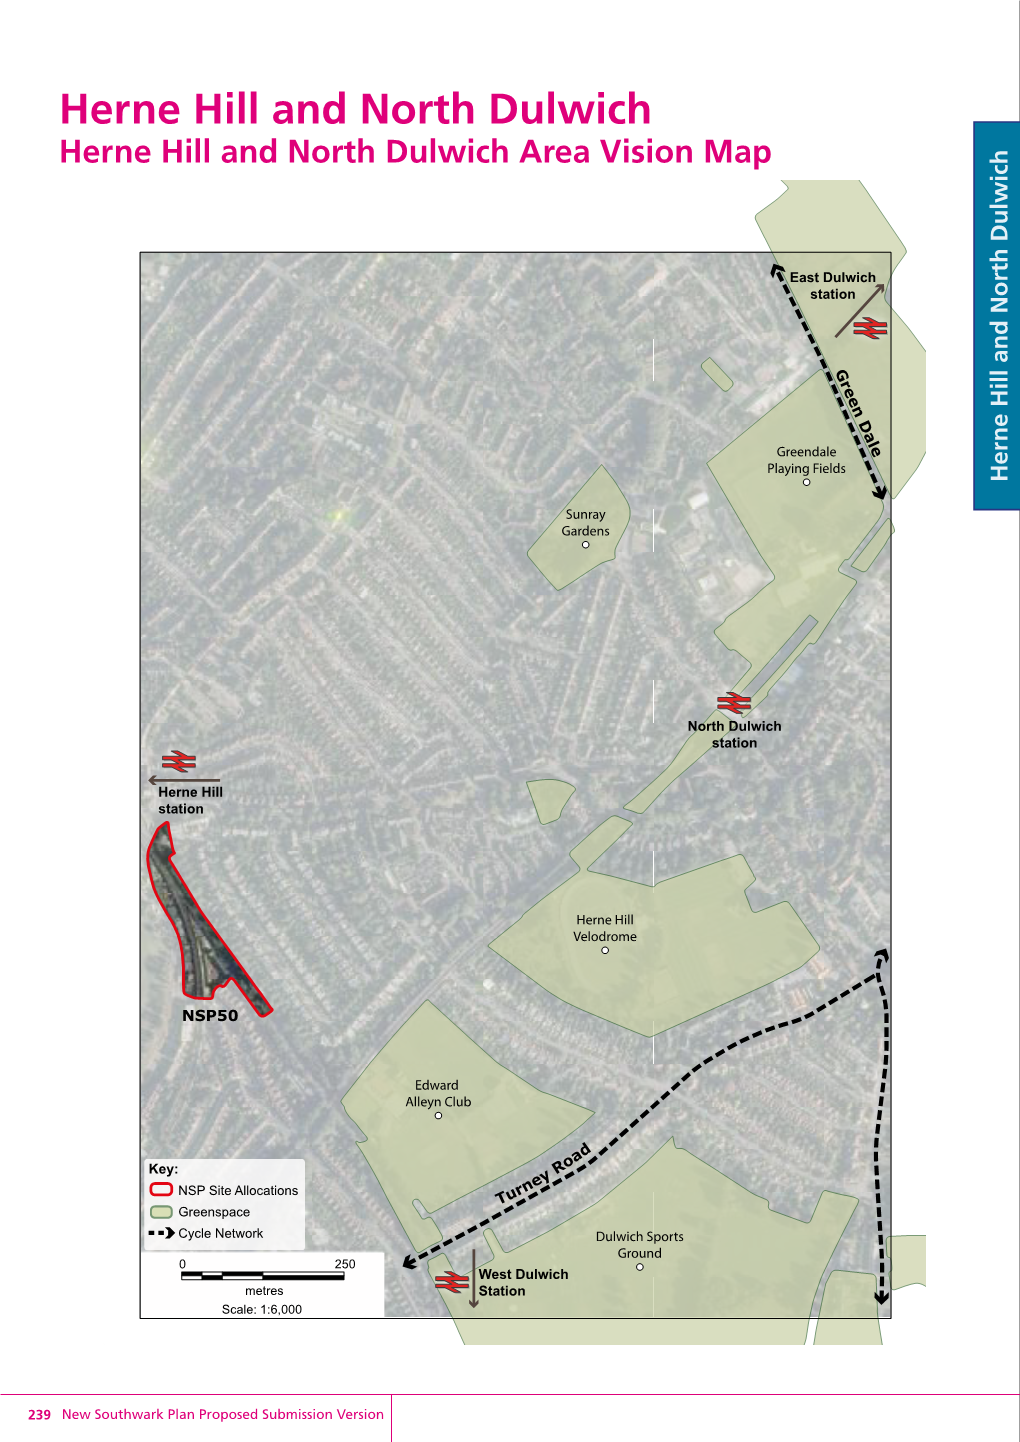 Herne Hill and North Dulwich Herne Hill and North Dulwich Area Vision Map